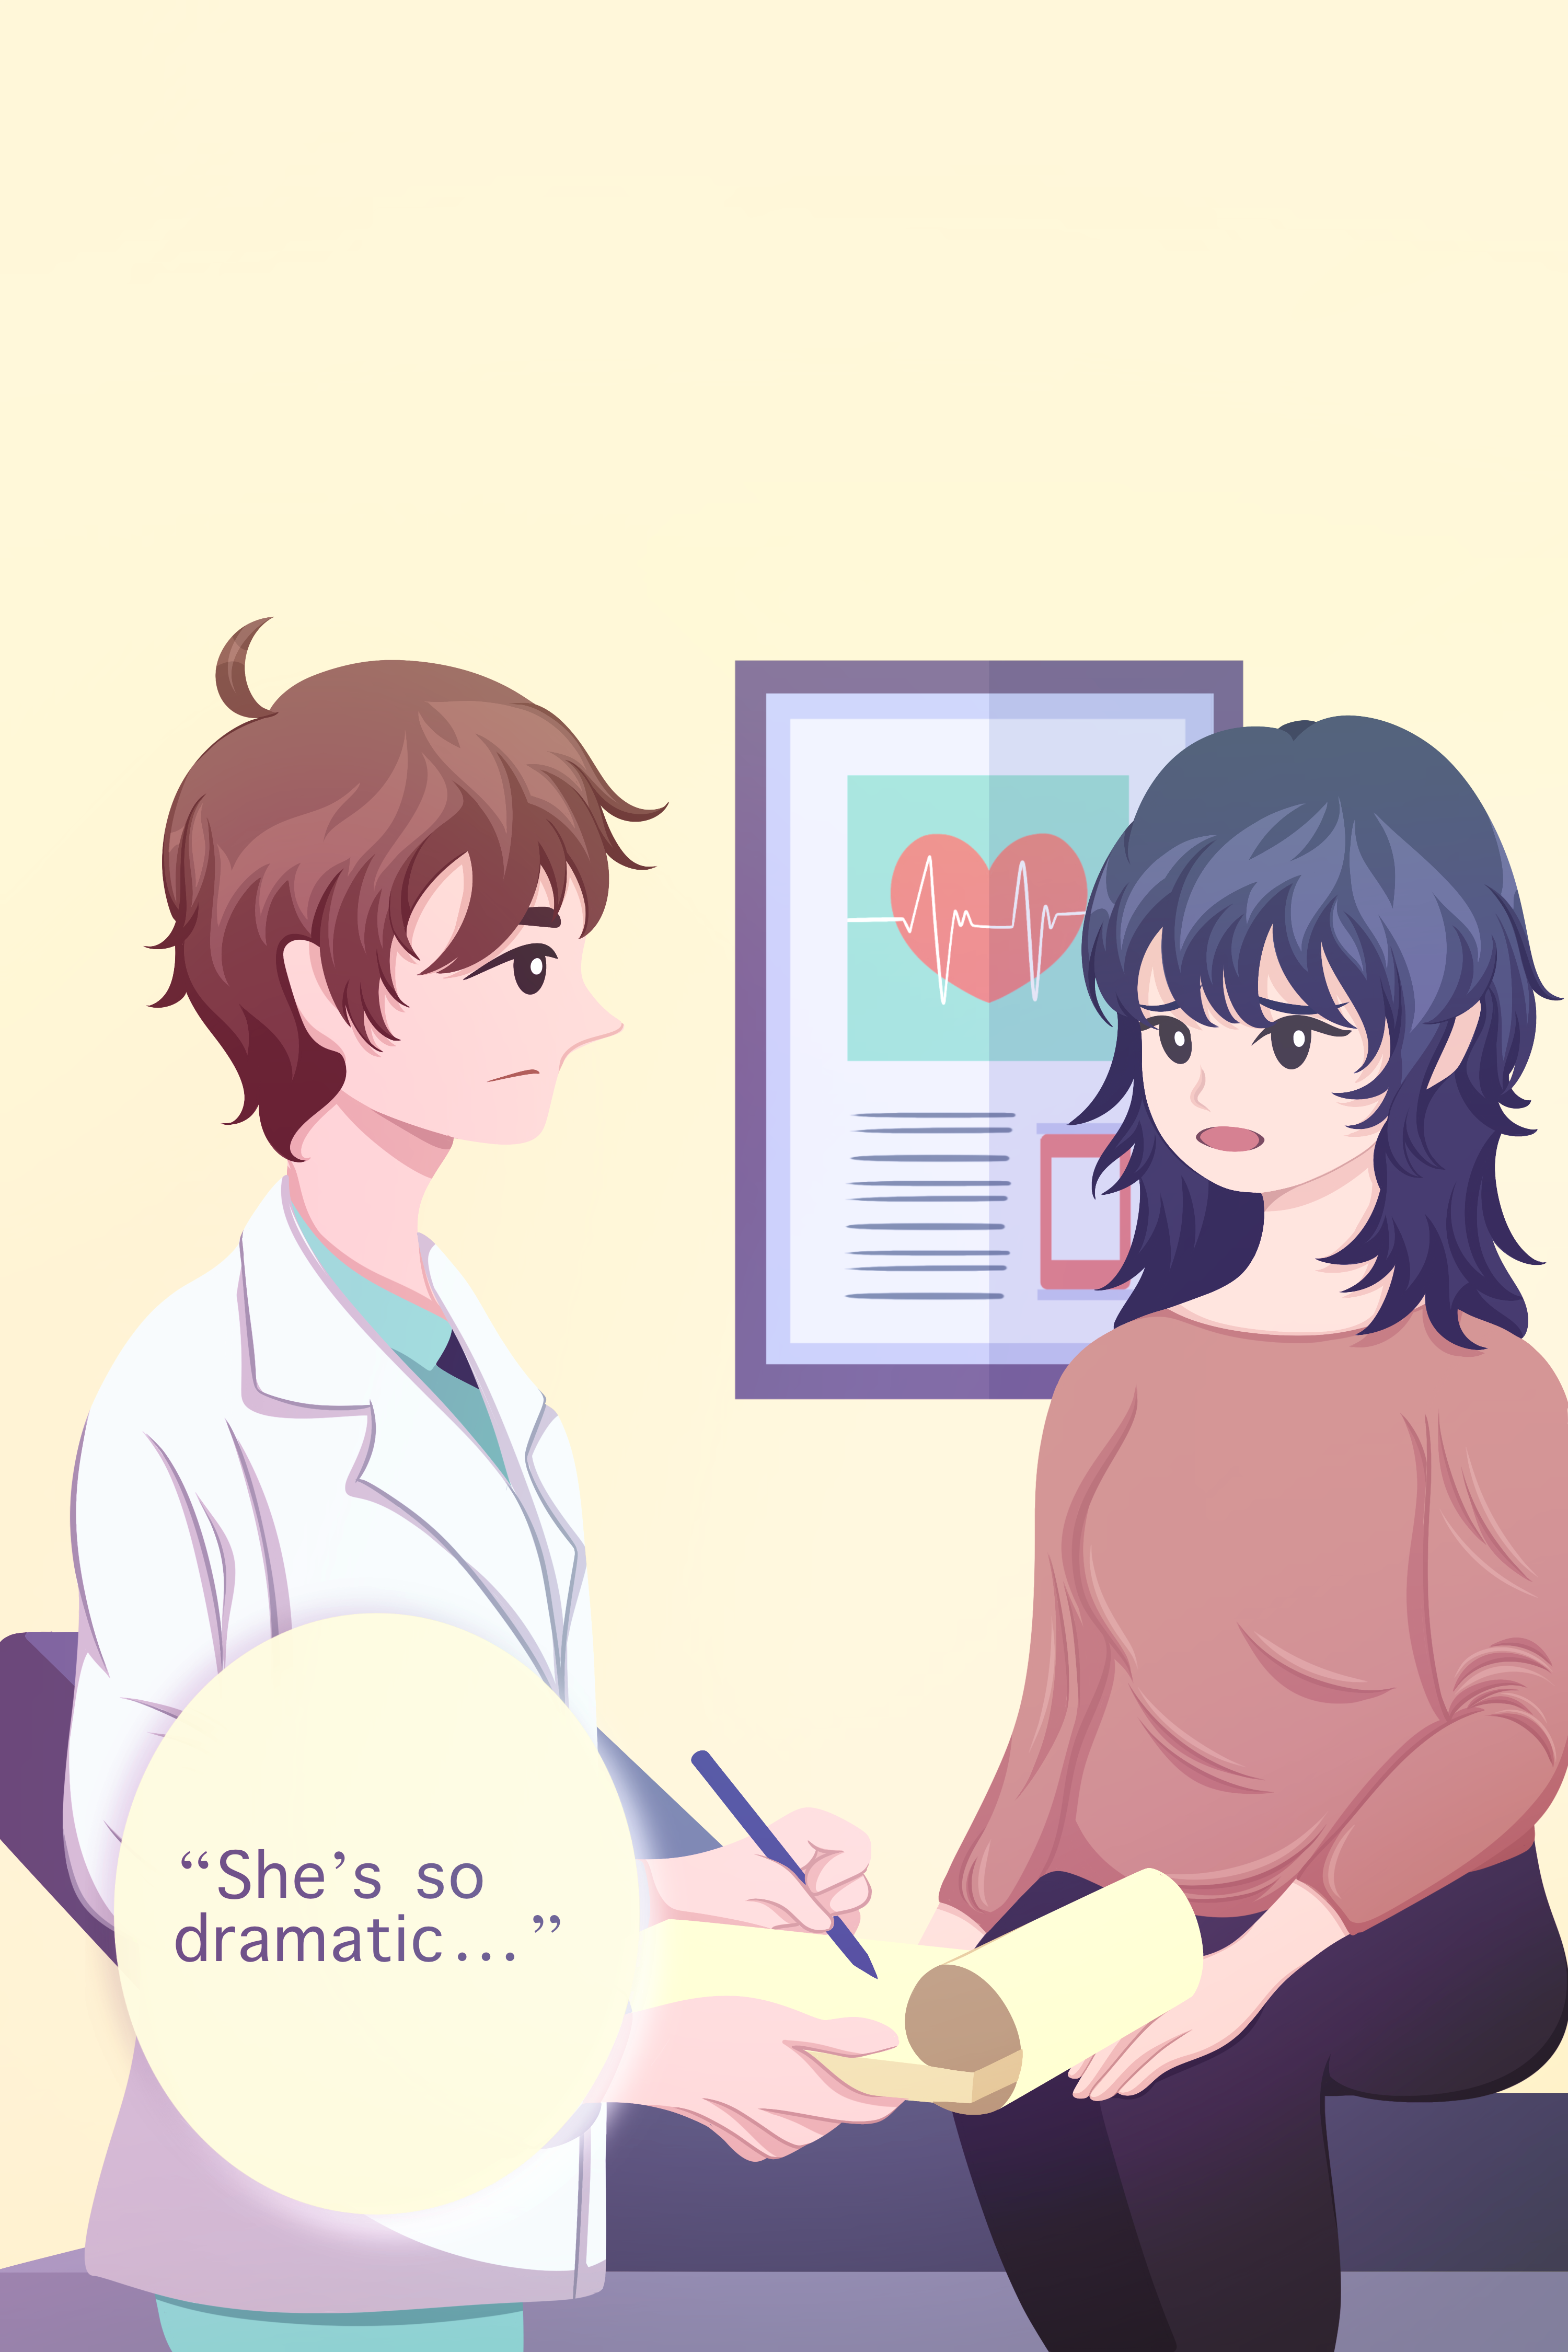 Male doctor and female patient in a doctor’s office. She is speaking but he is ignoring her and there’s a thought bubble that reads “she’s so dramatic.”